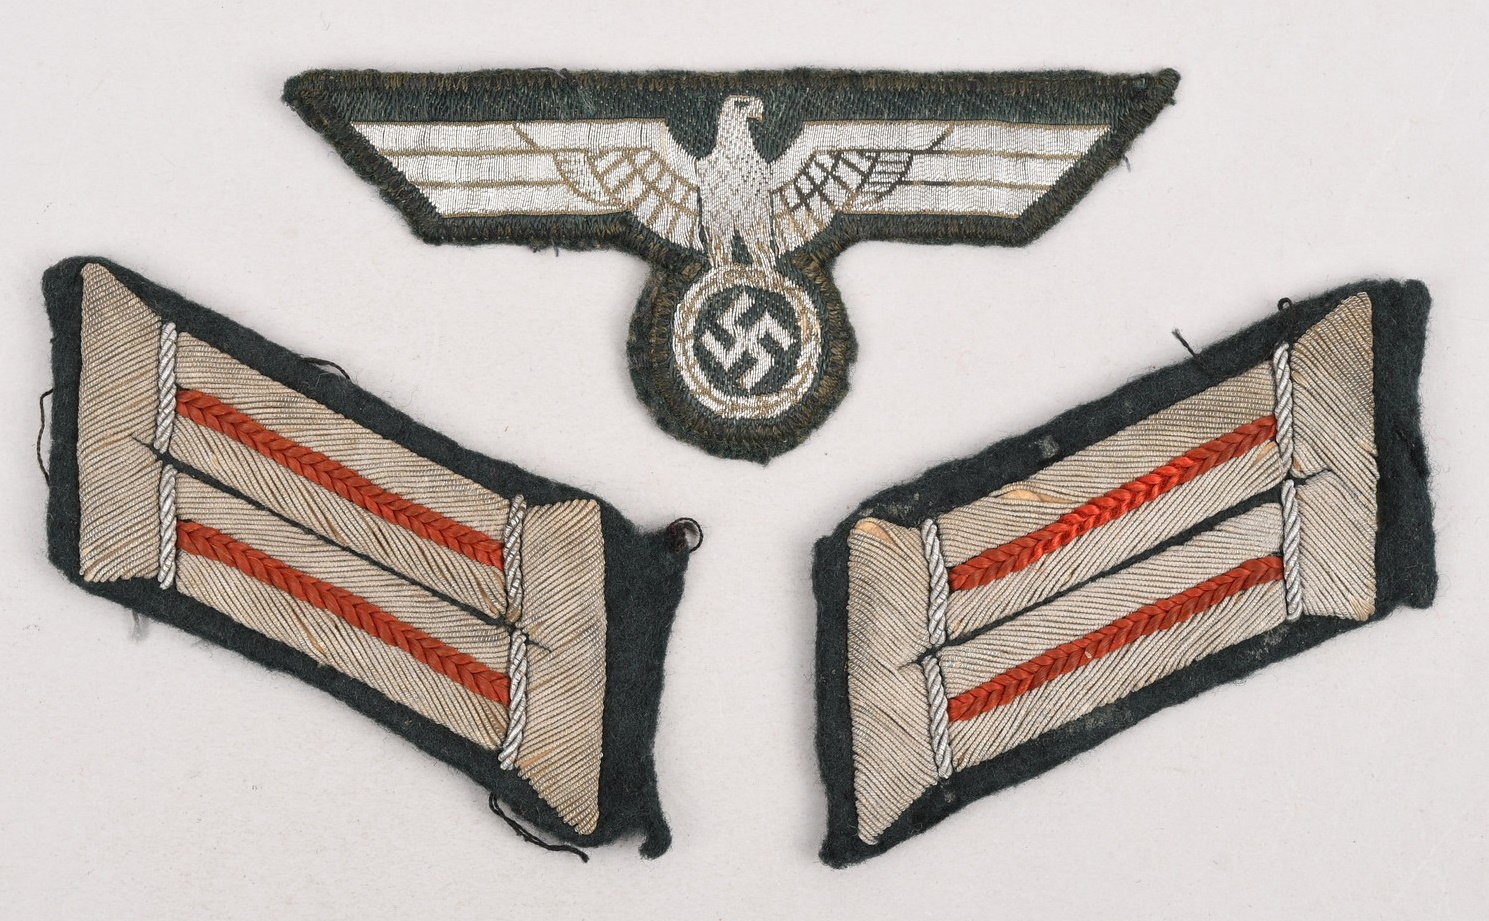 Heer Artillery Officer's Uniform Removed Breast Eagle And Collar